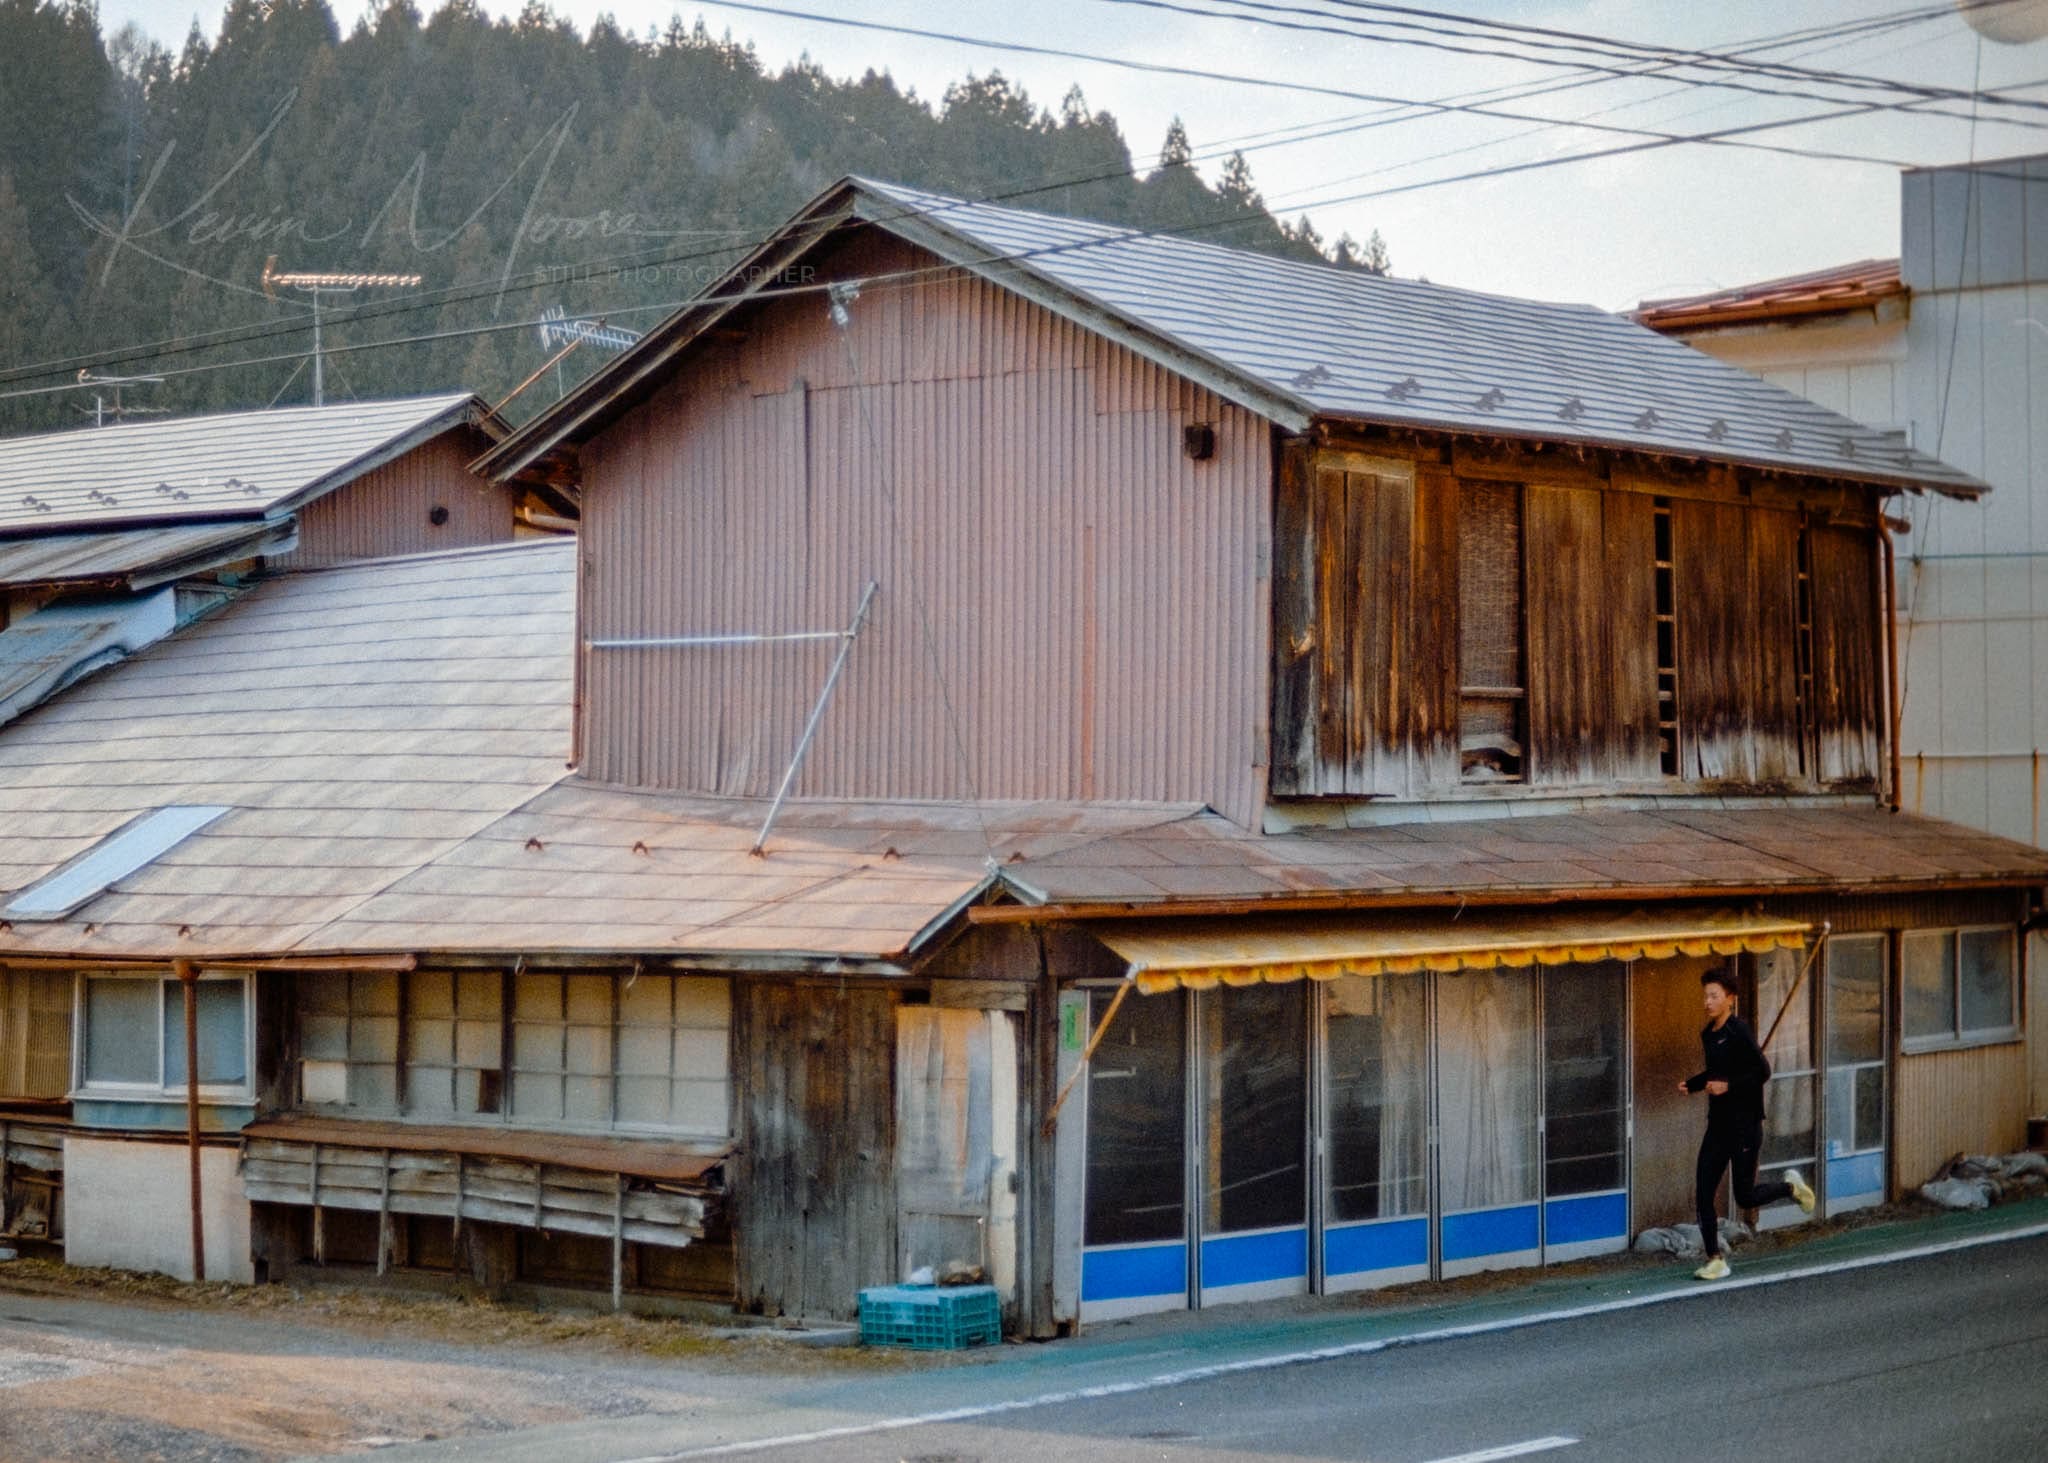 Lonely figure passing weathered building in serene, rural setting at dusk